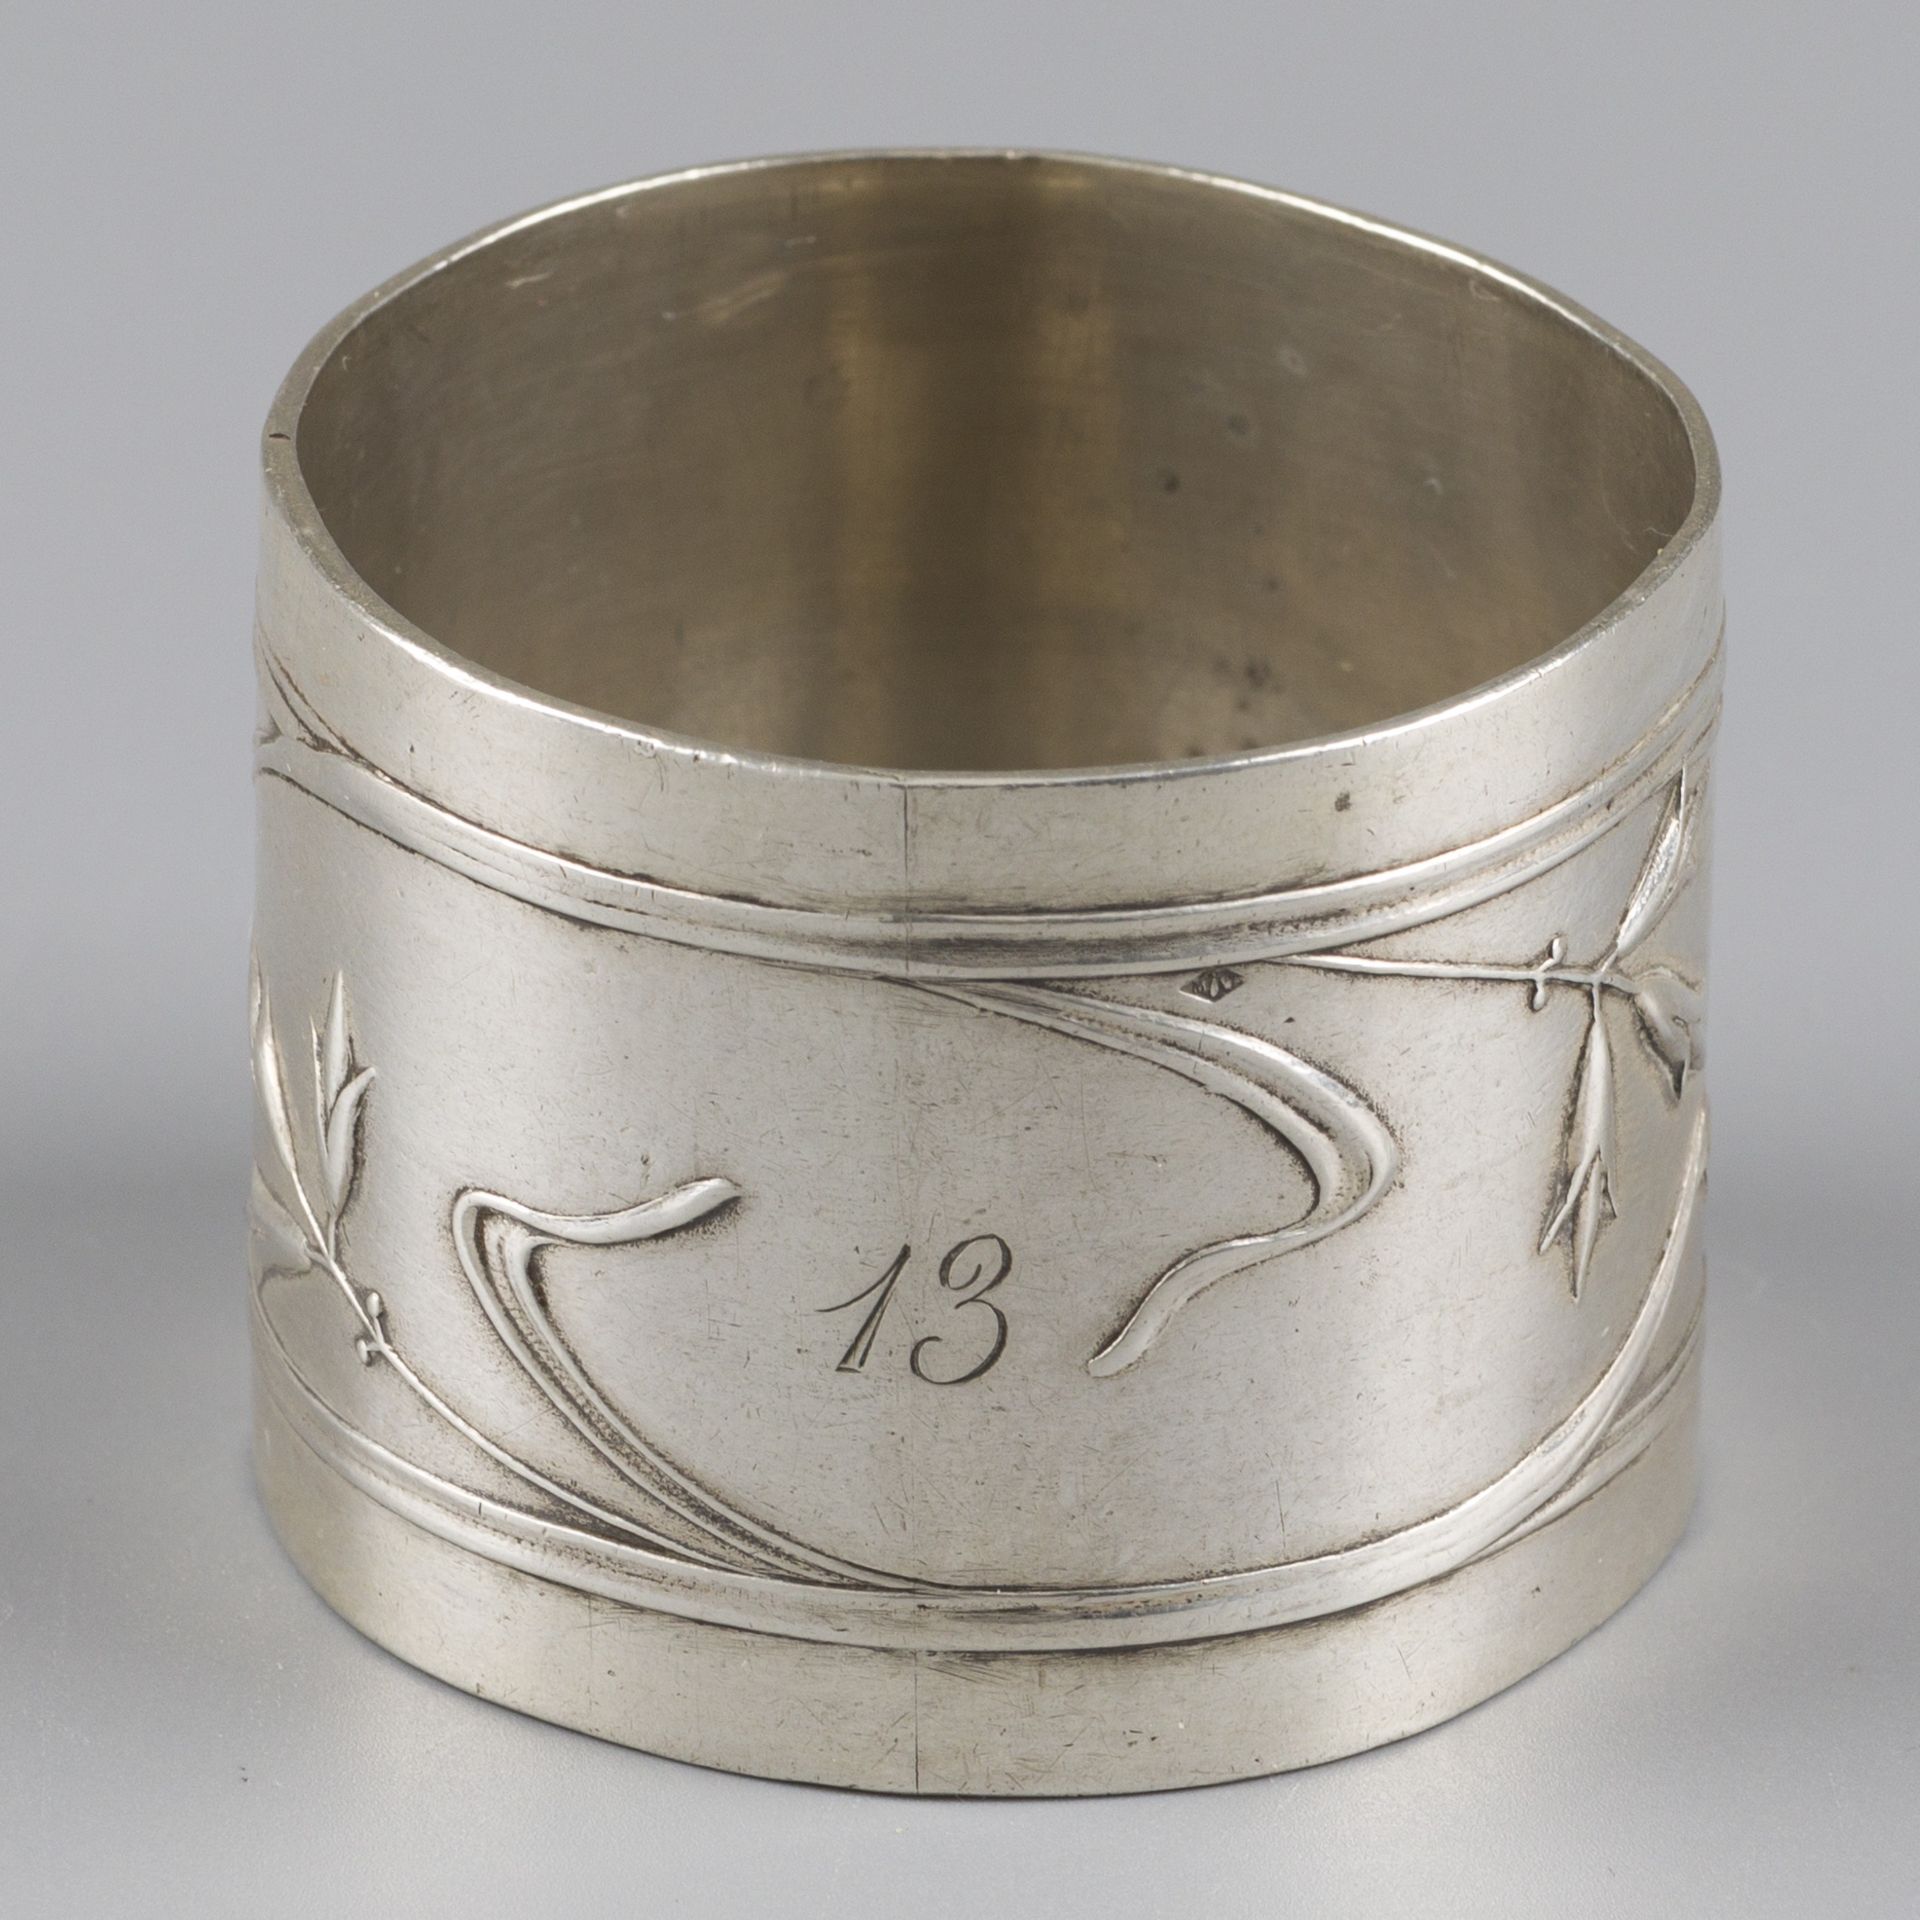 No reserve - 2-piece set of silver napkin rings. - Image 3 of 5